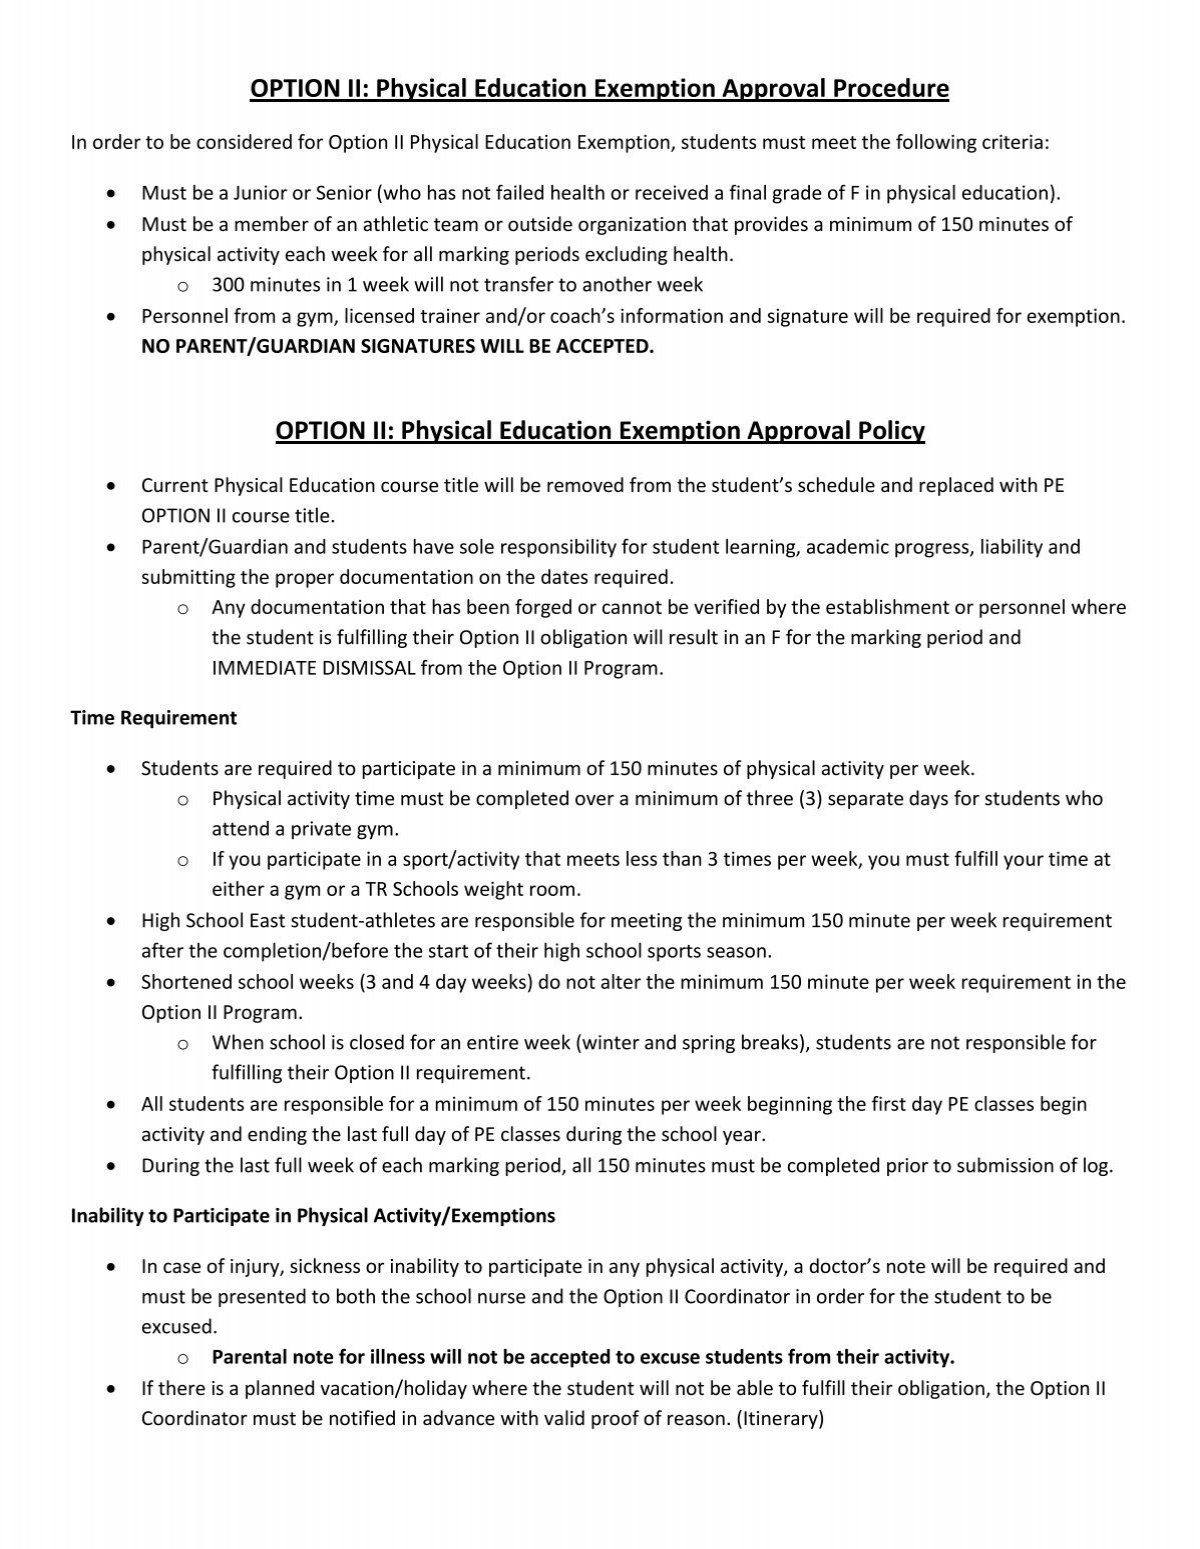 option-ii-physical-education-exemption-approval-procedure